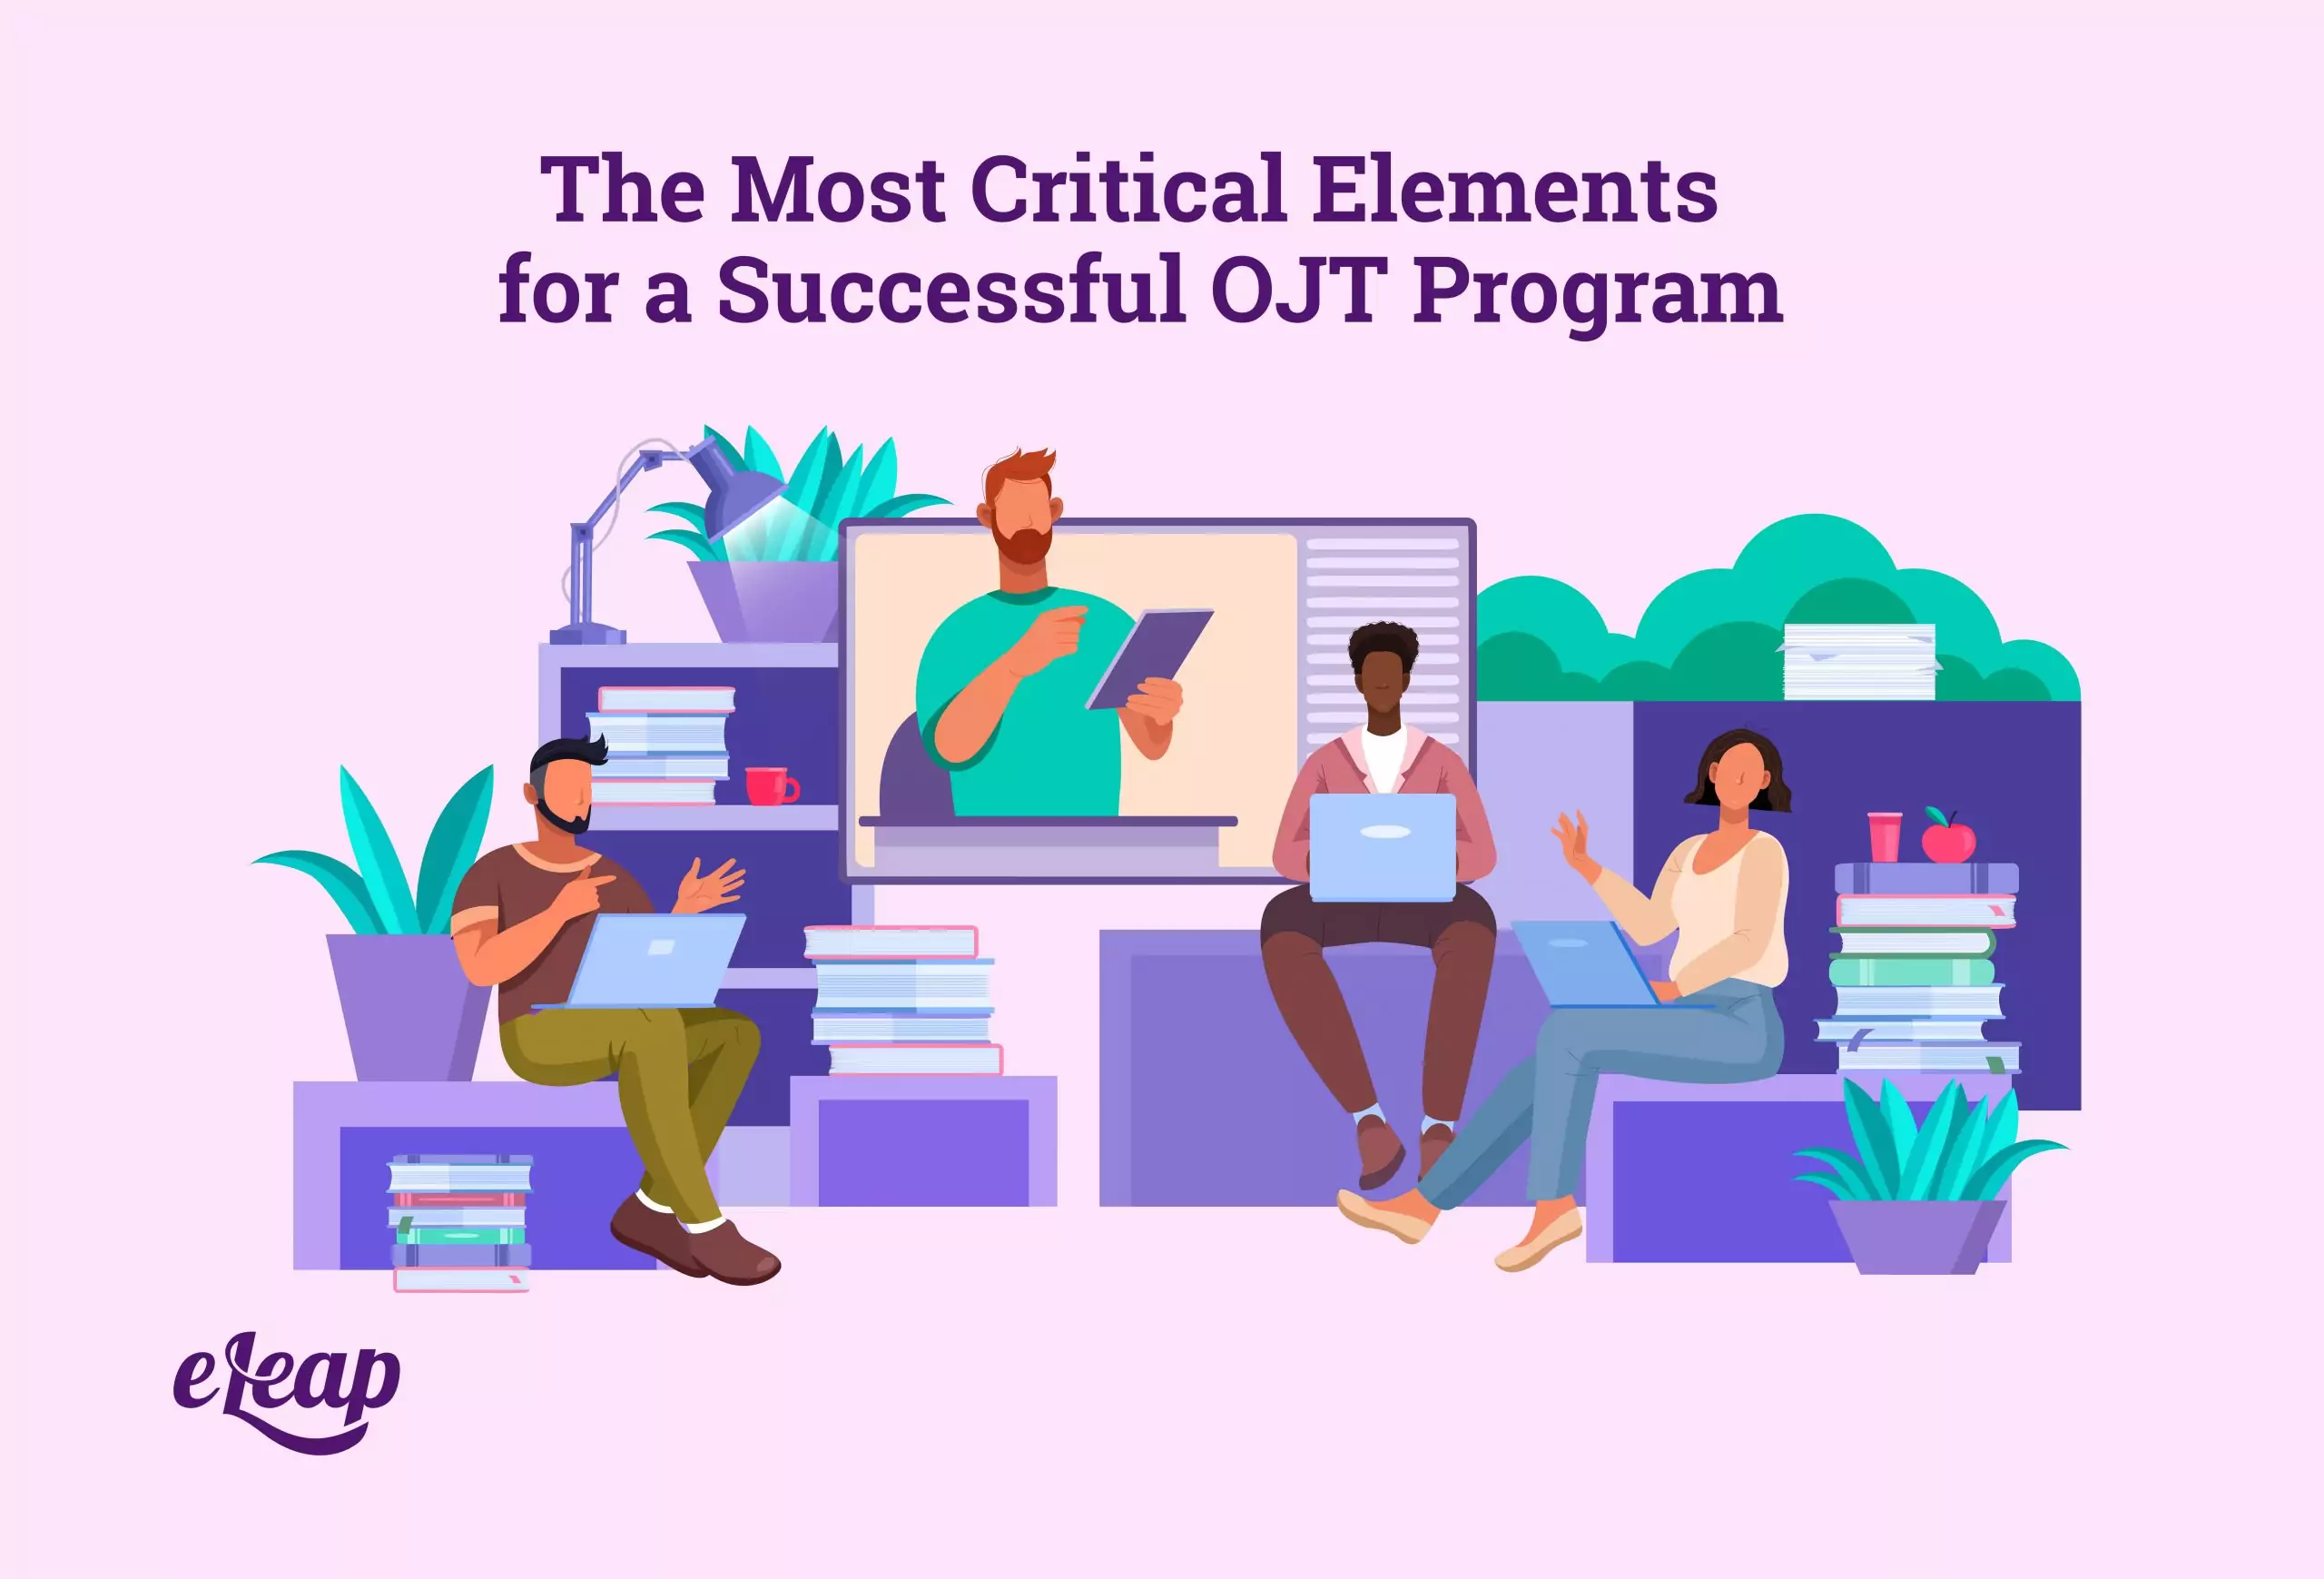 The Most Critical Elements for a Successful OJT Program